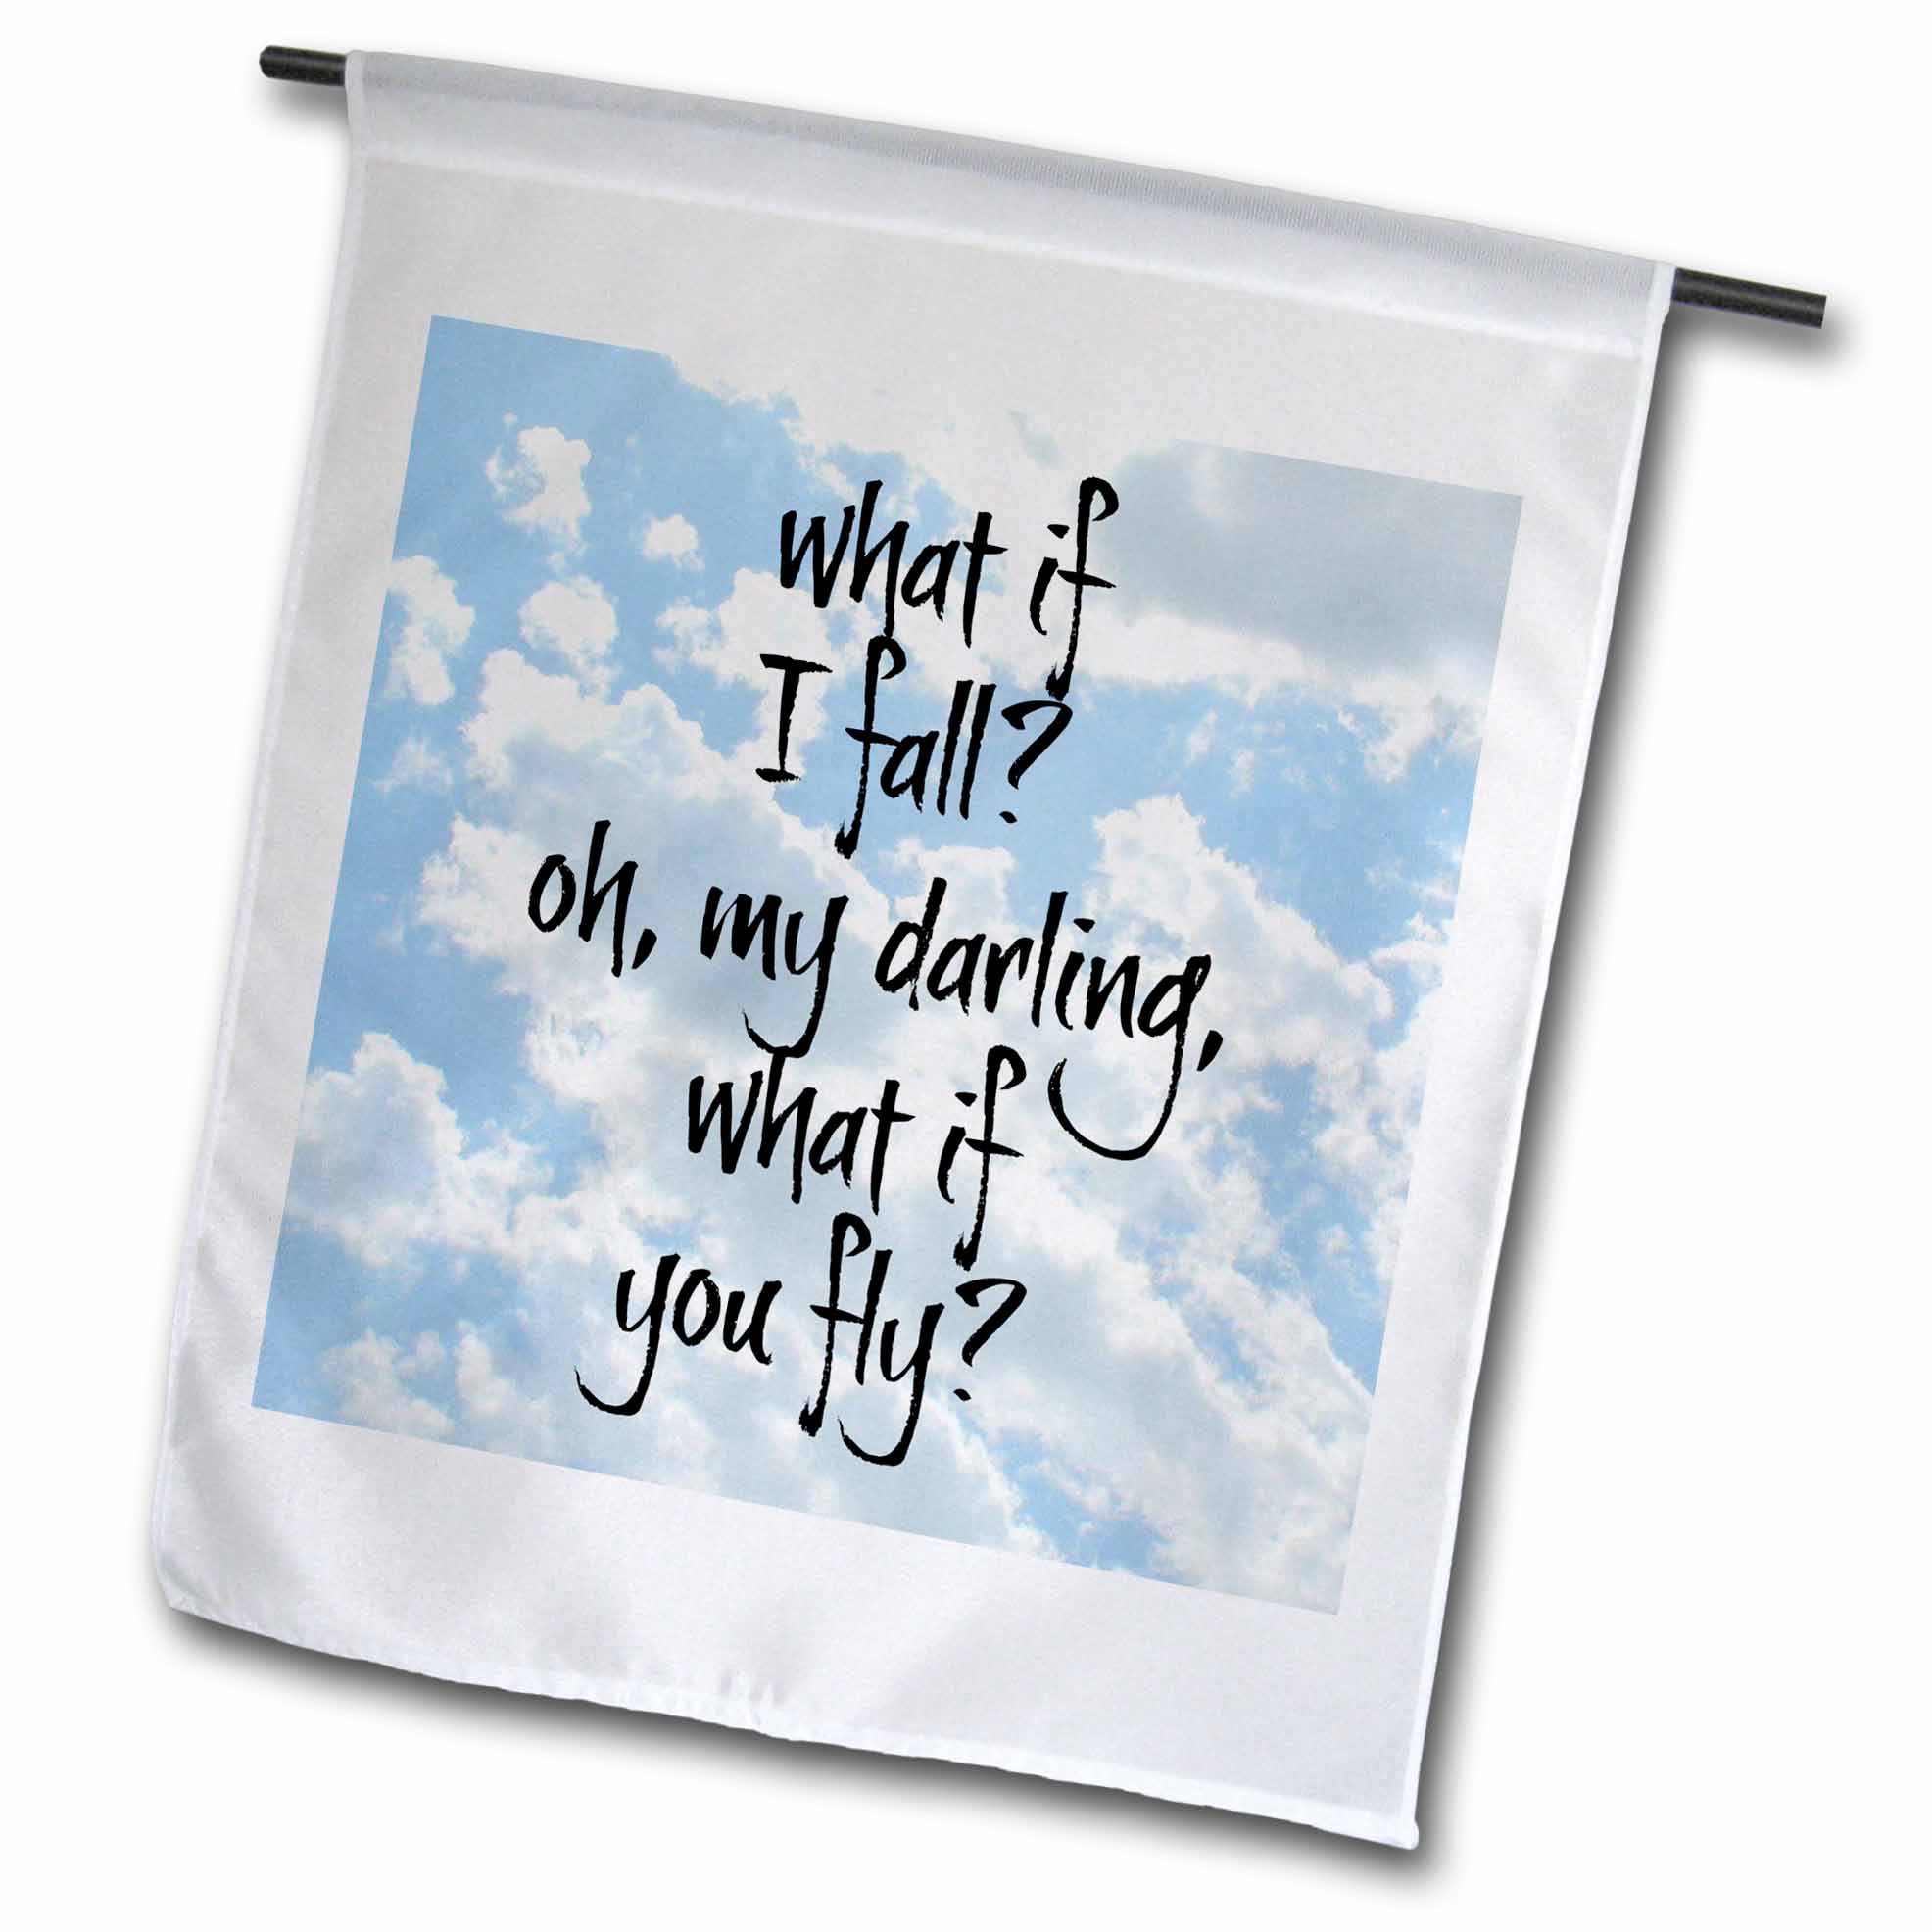 3dRose what if I fall oh my darling what if you fly black letters on sky pic - Garden Flag, 12 by 18-inch - image 1 of 1